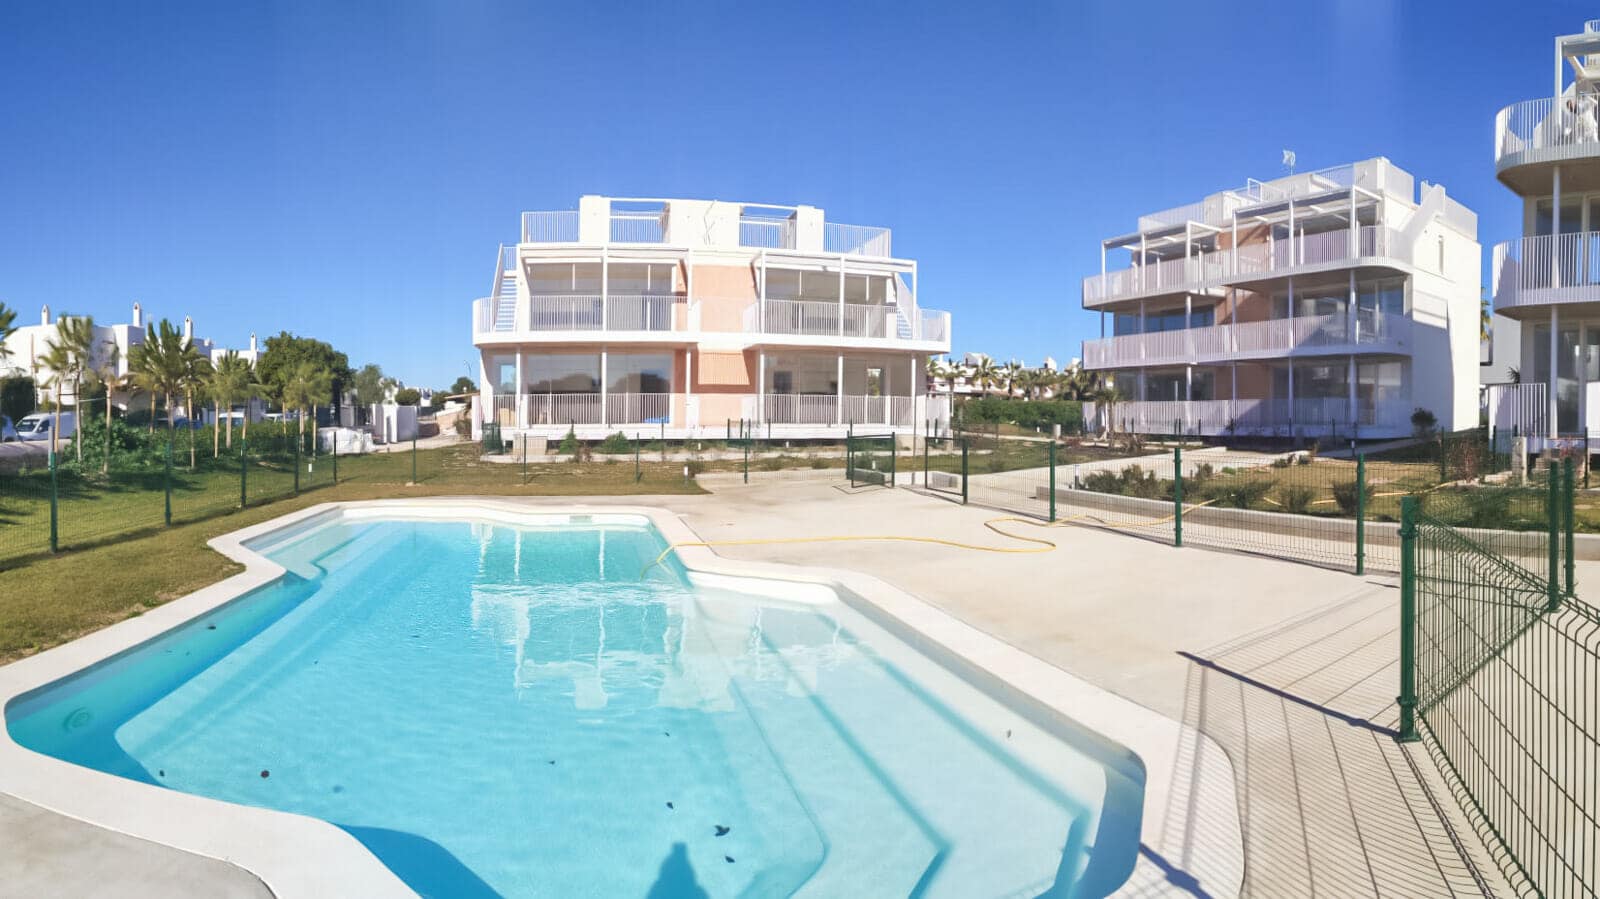 Apartments with terraces and community pool in Cala Egos